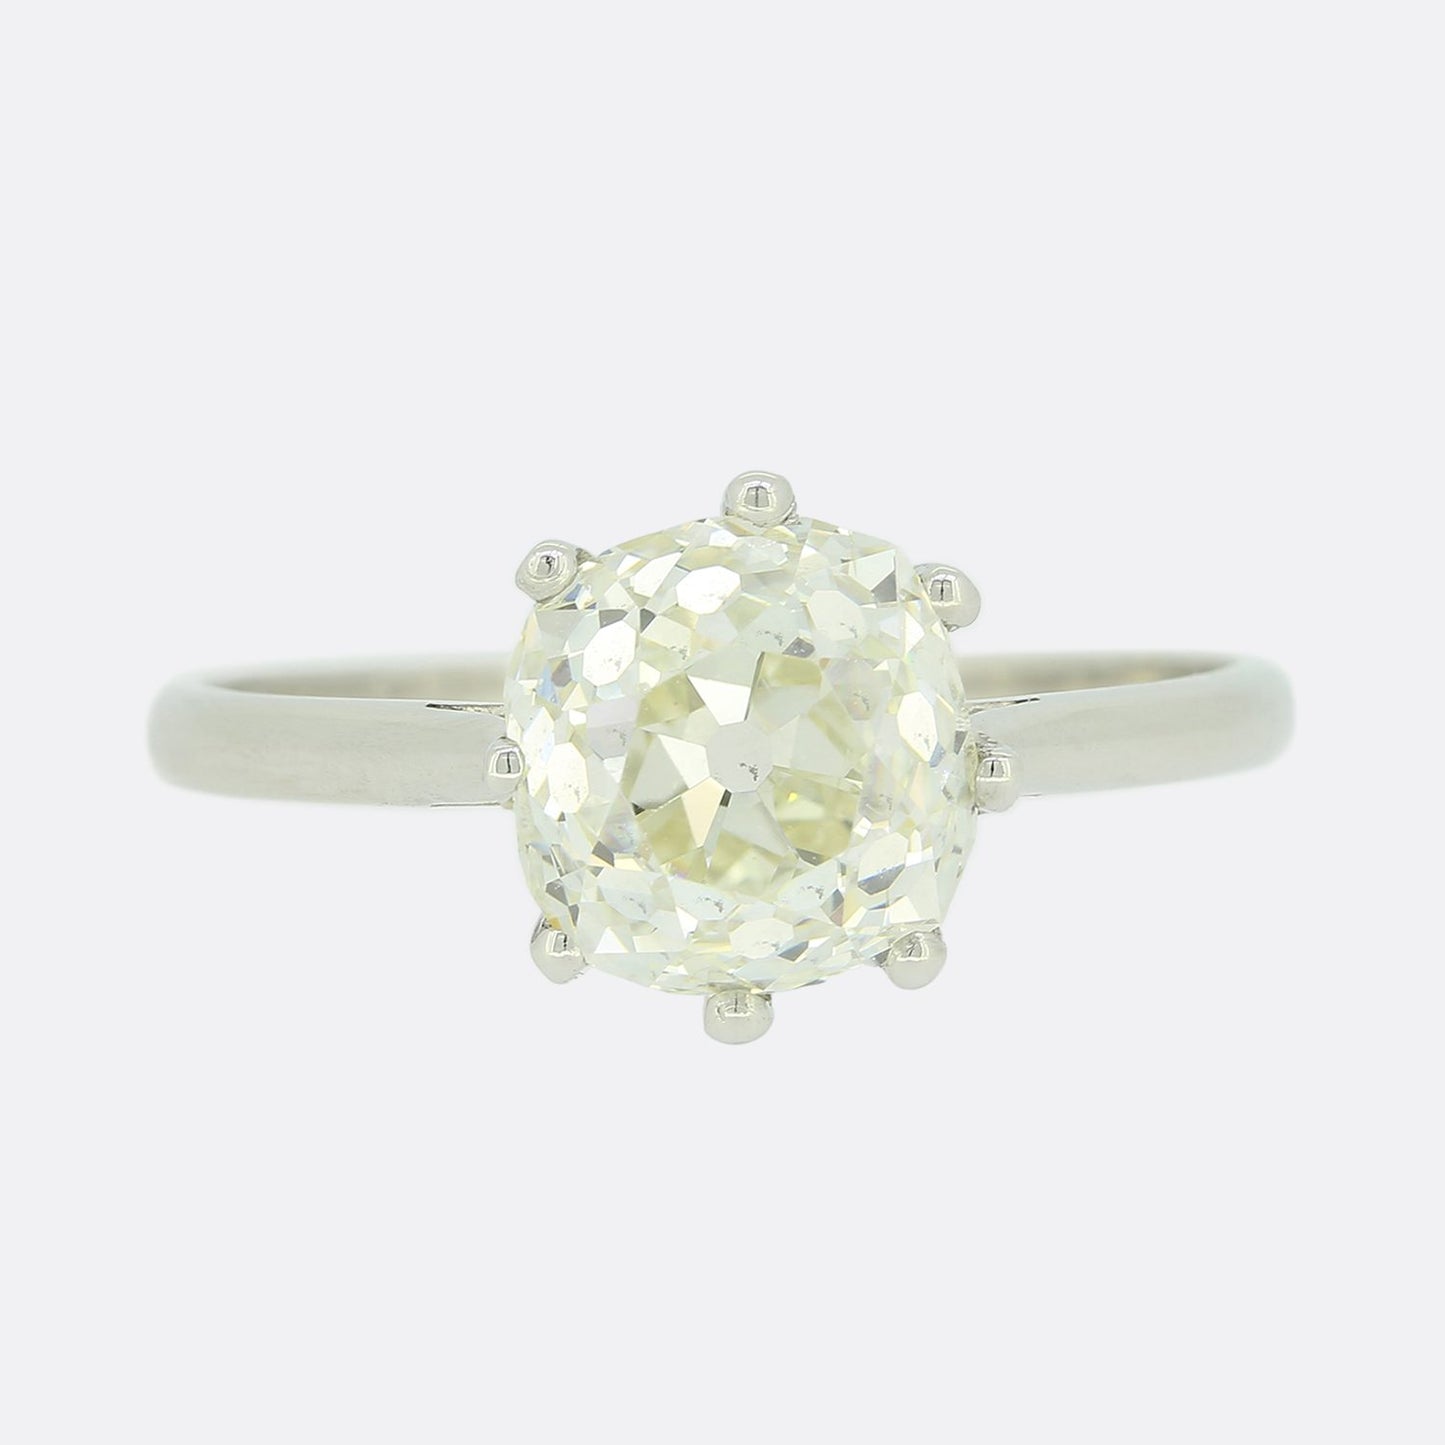 1.95 Carat Old Cushion Cut Diamond Solitaire Ring